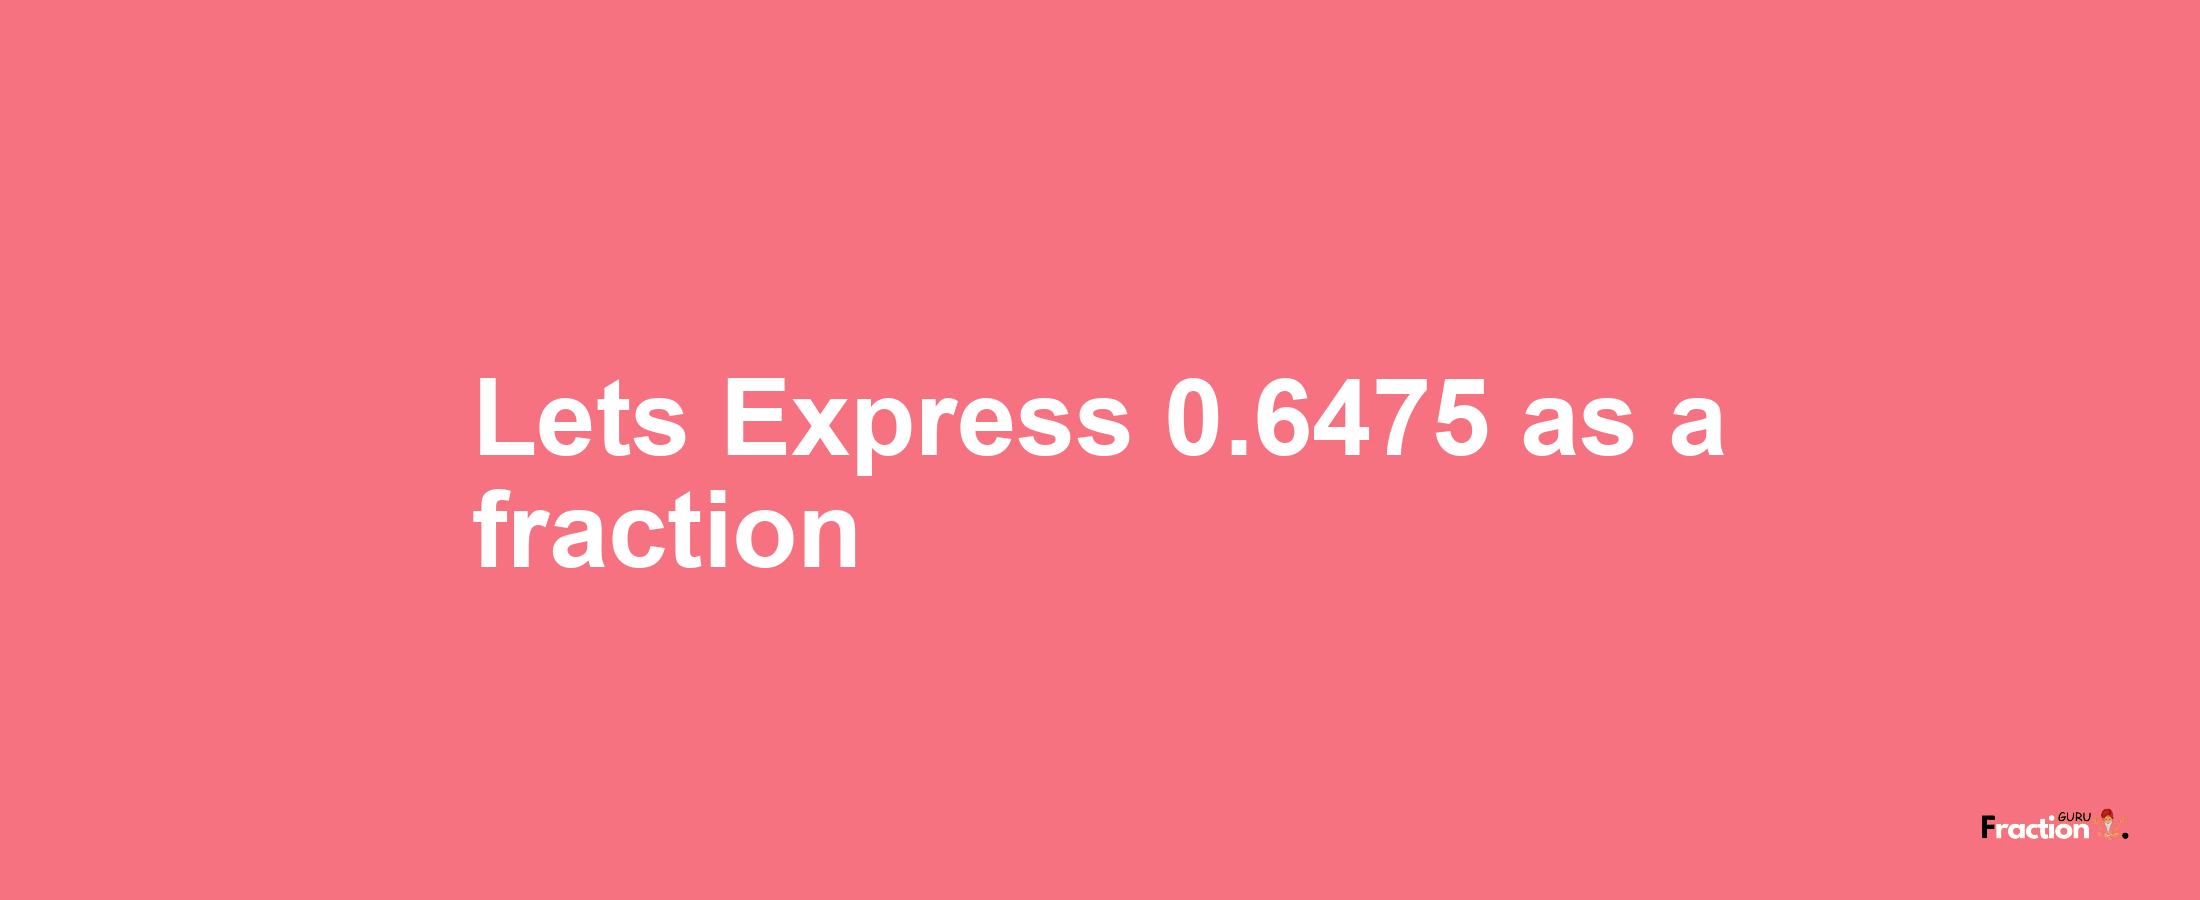 Lets Express 0.6475 as afraction